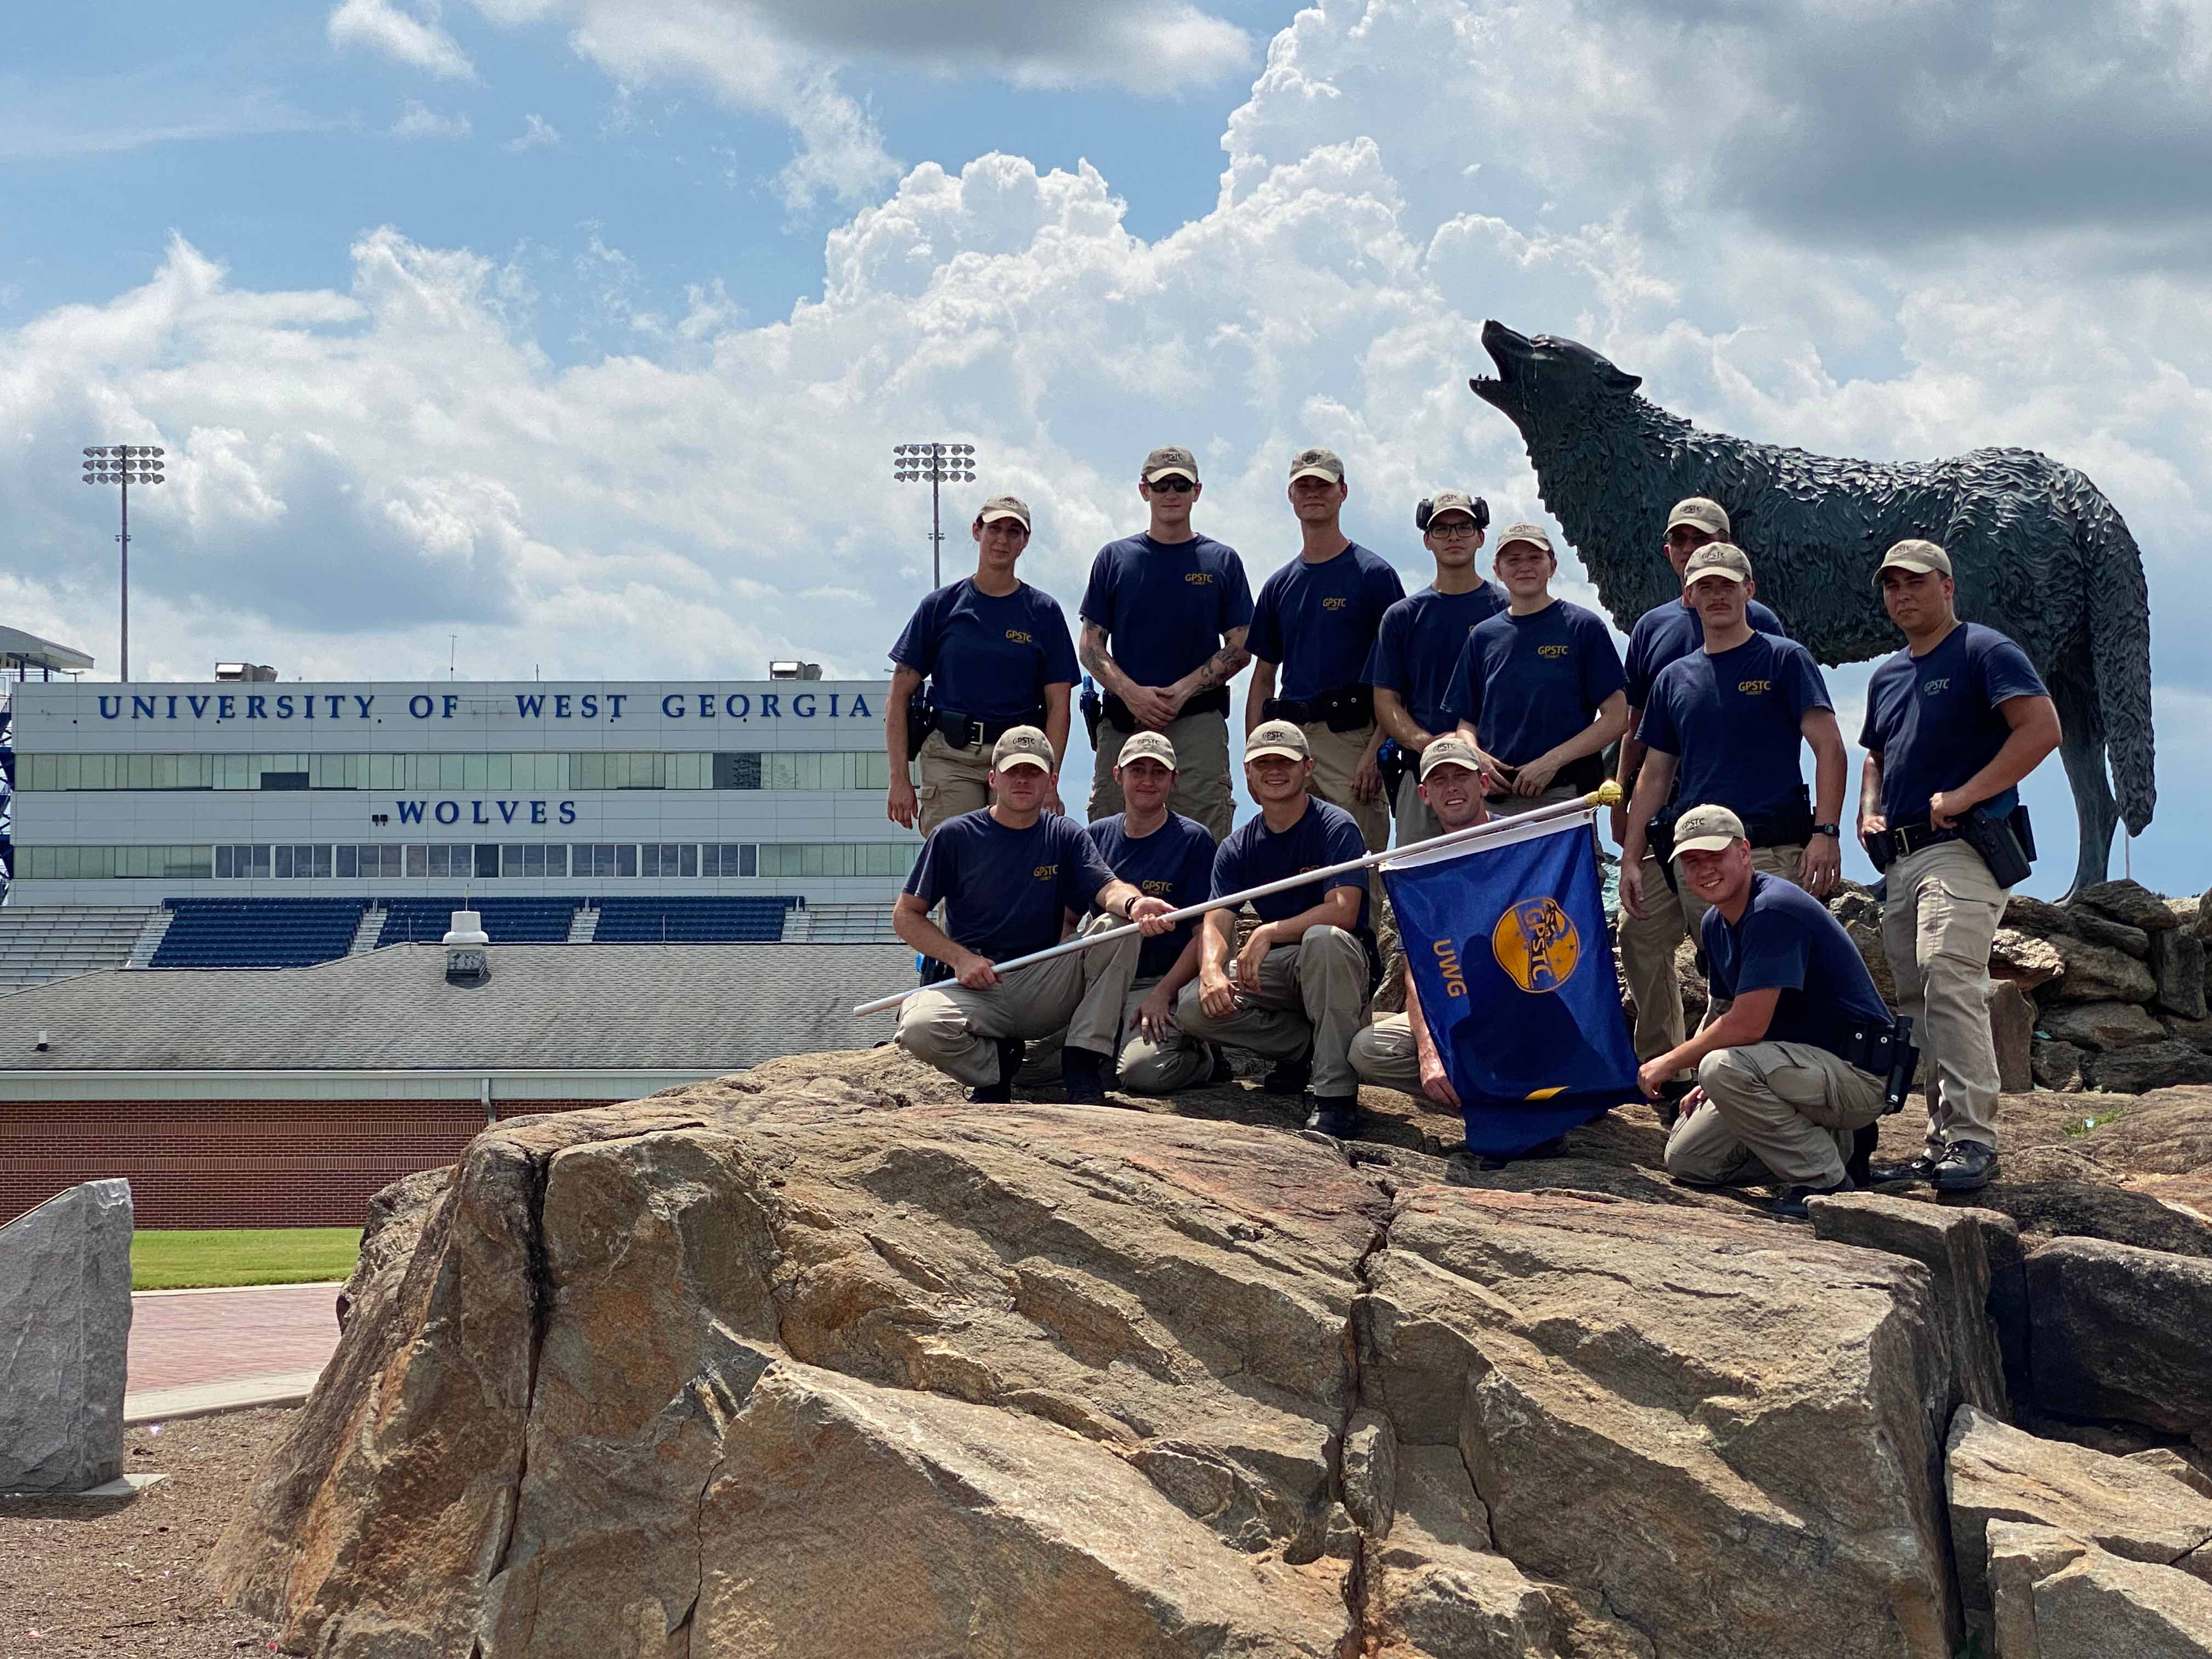 The first cohort of the ALETE program in front of the wolf at the Stadium